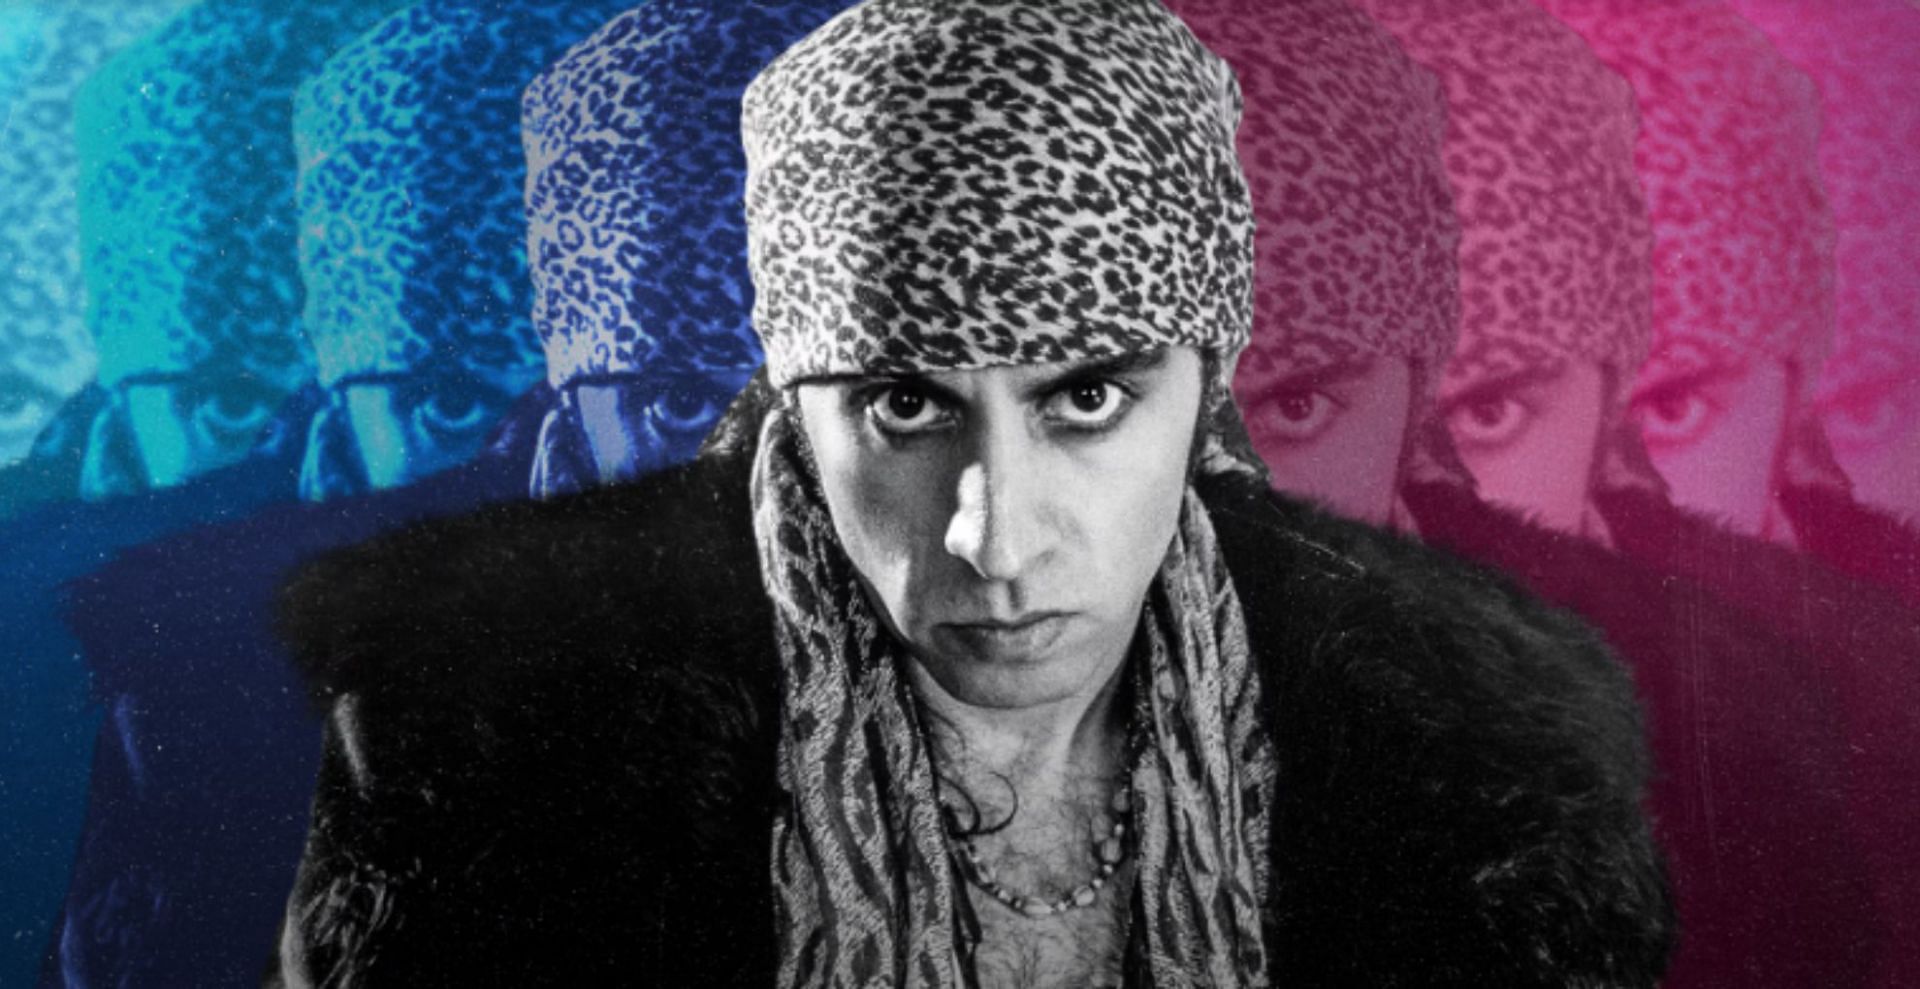 Where to watch the Stevie Van Zandt documentary? Streaming options explored